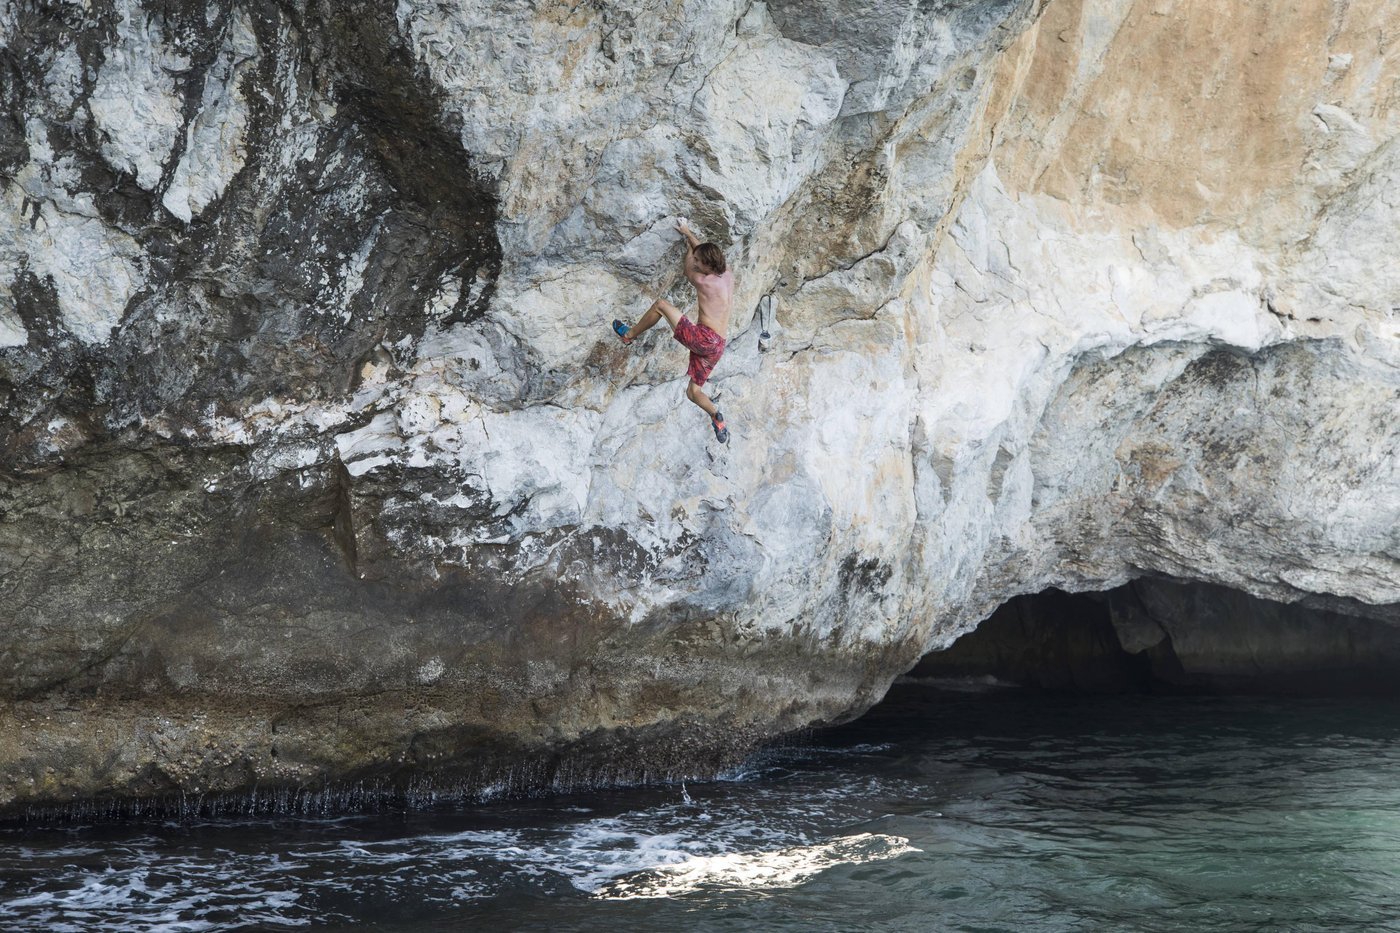 Chris Sharma. Christopher Pike / Red Bull Content Pool